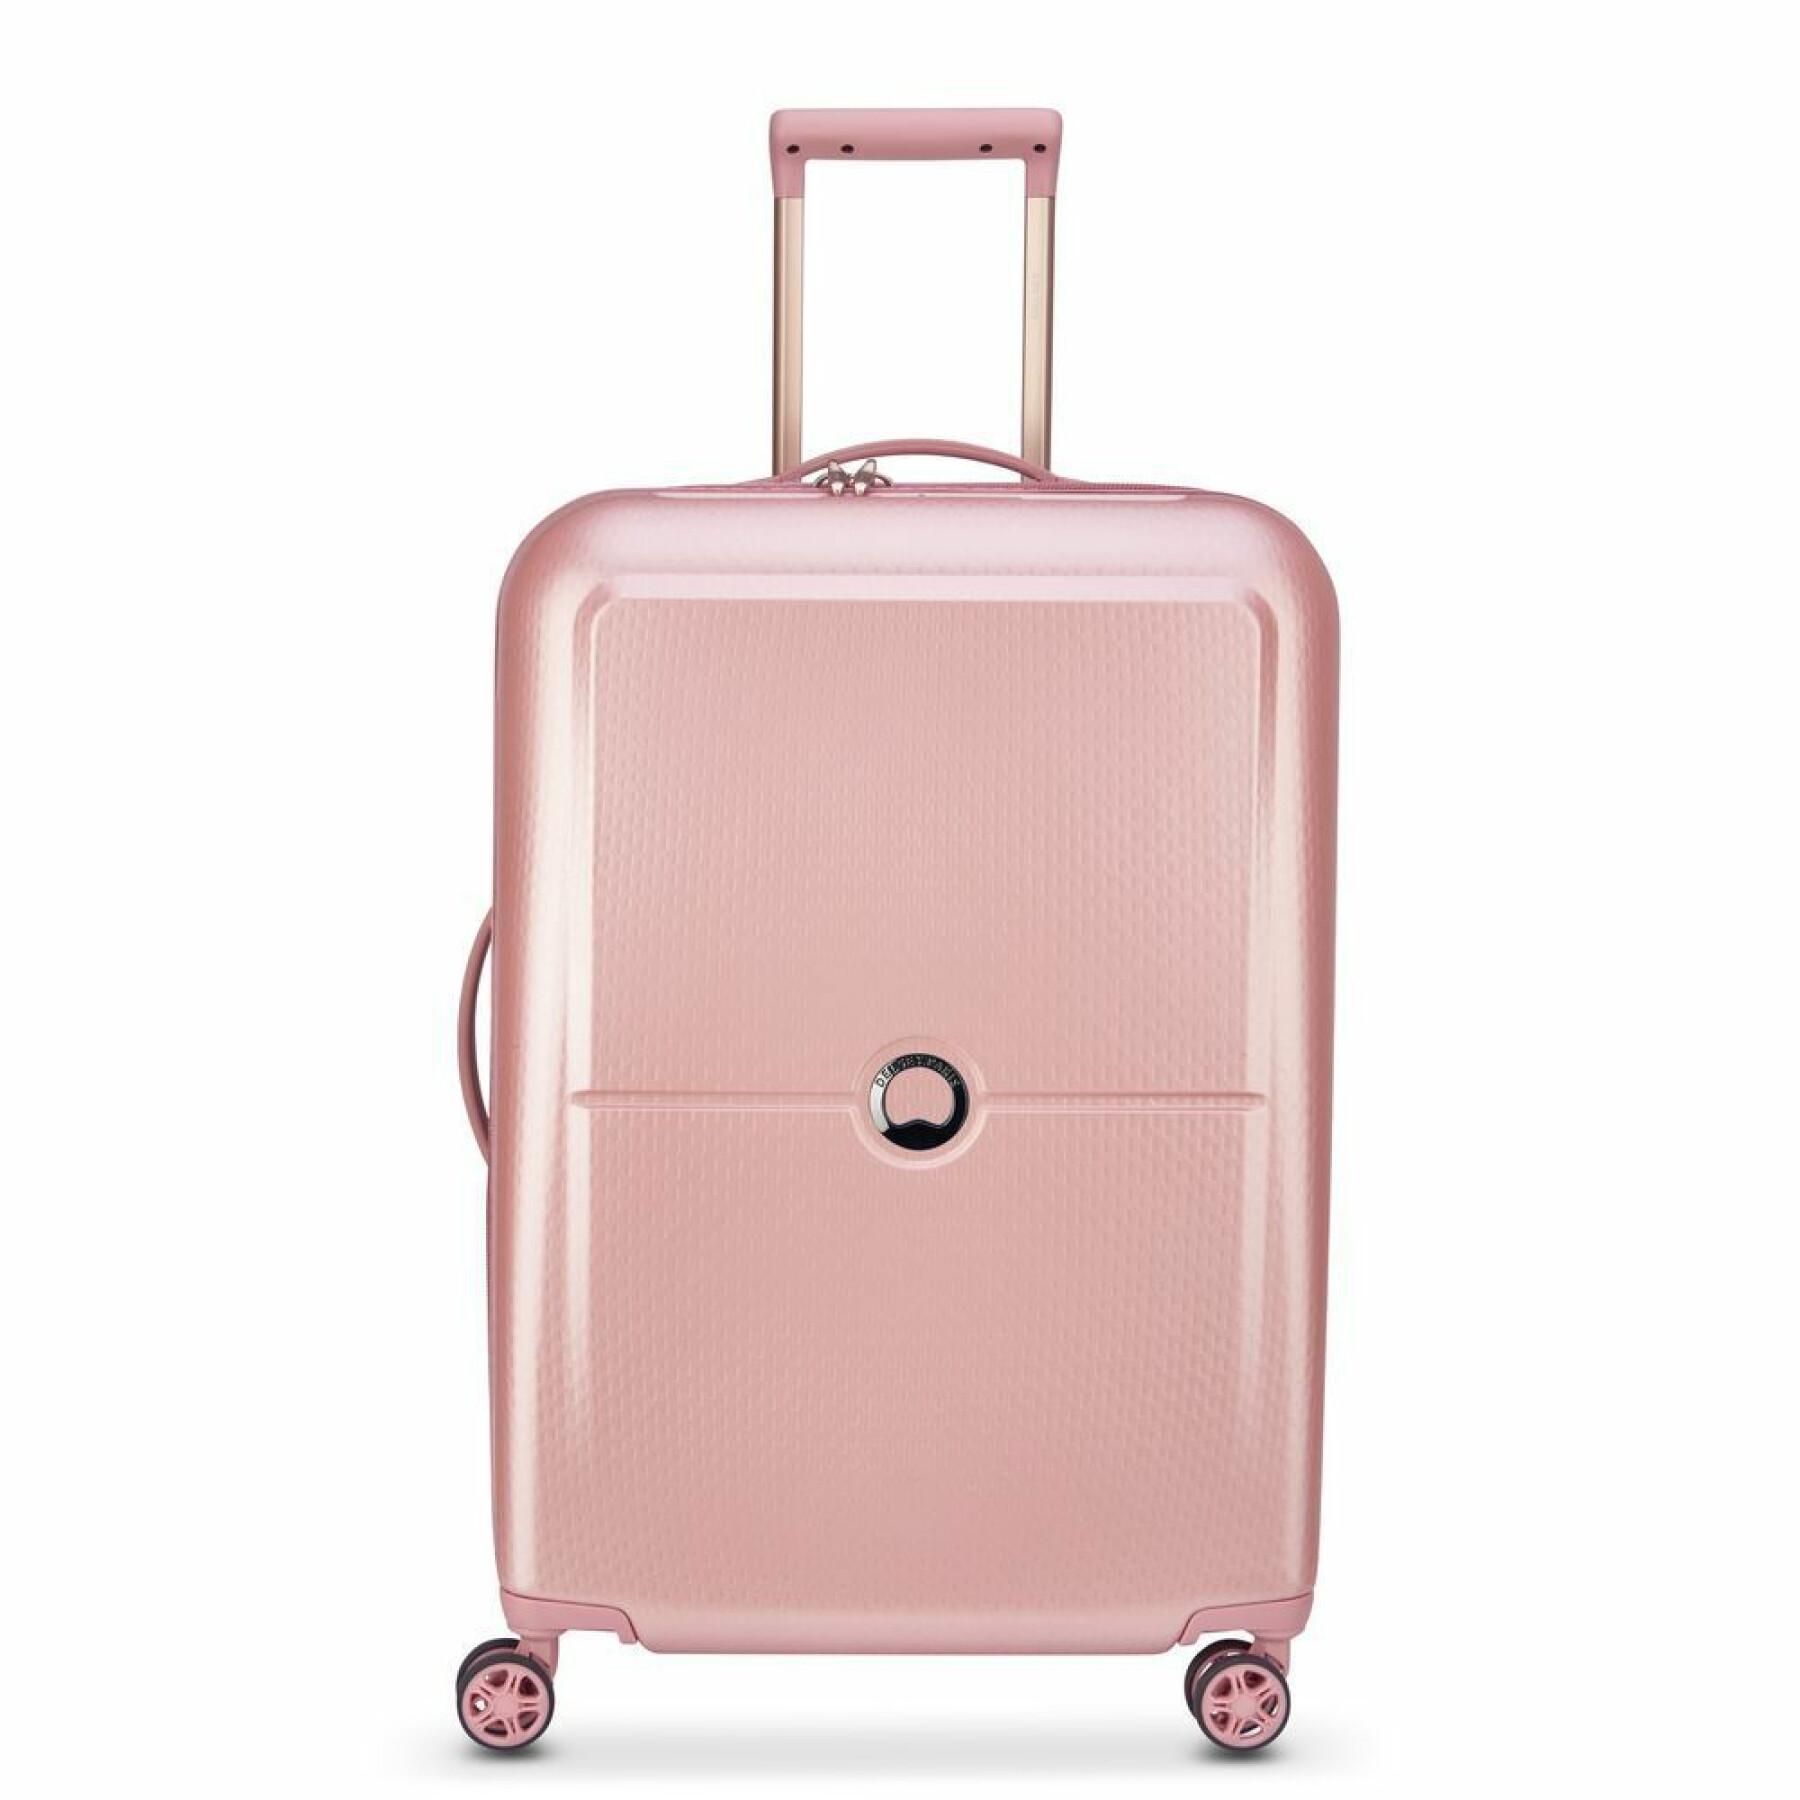 Valise trolley 4 doubles roues Delsey Turenne 65 cm